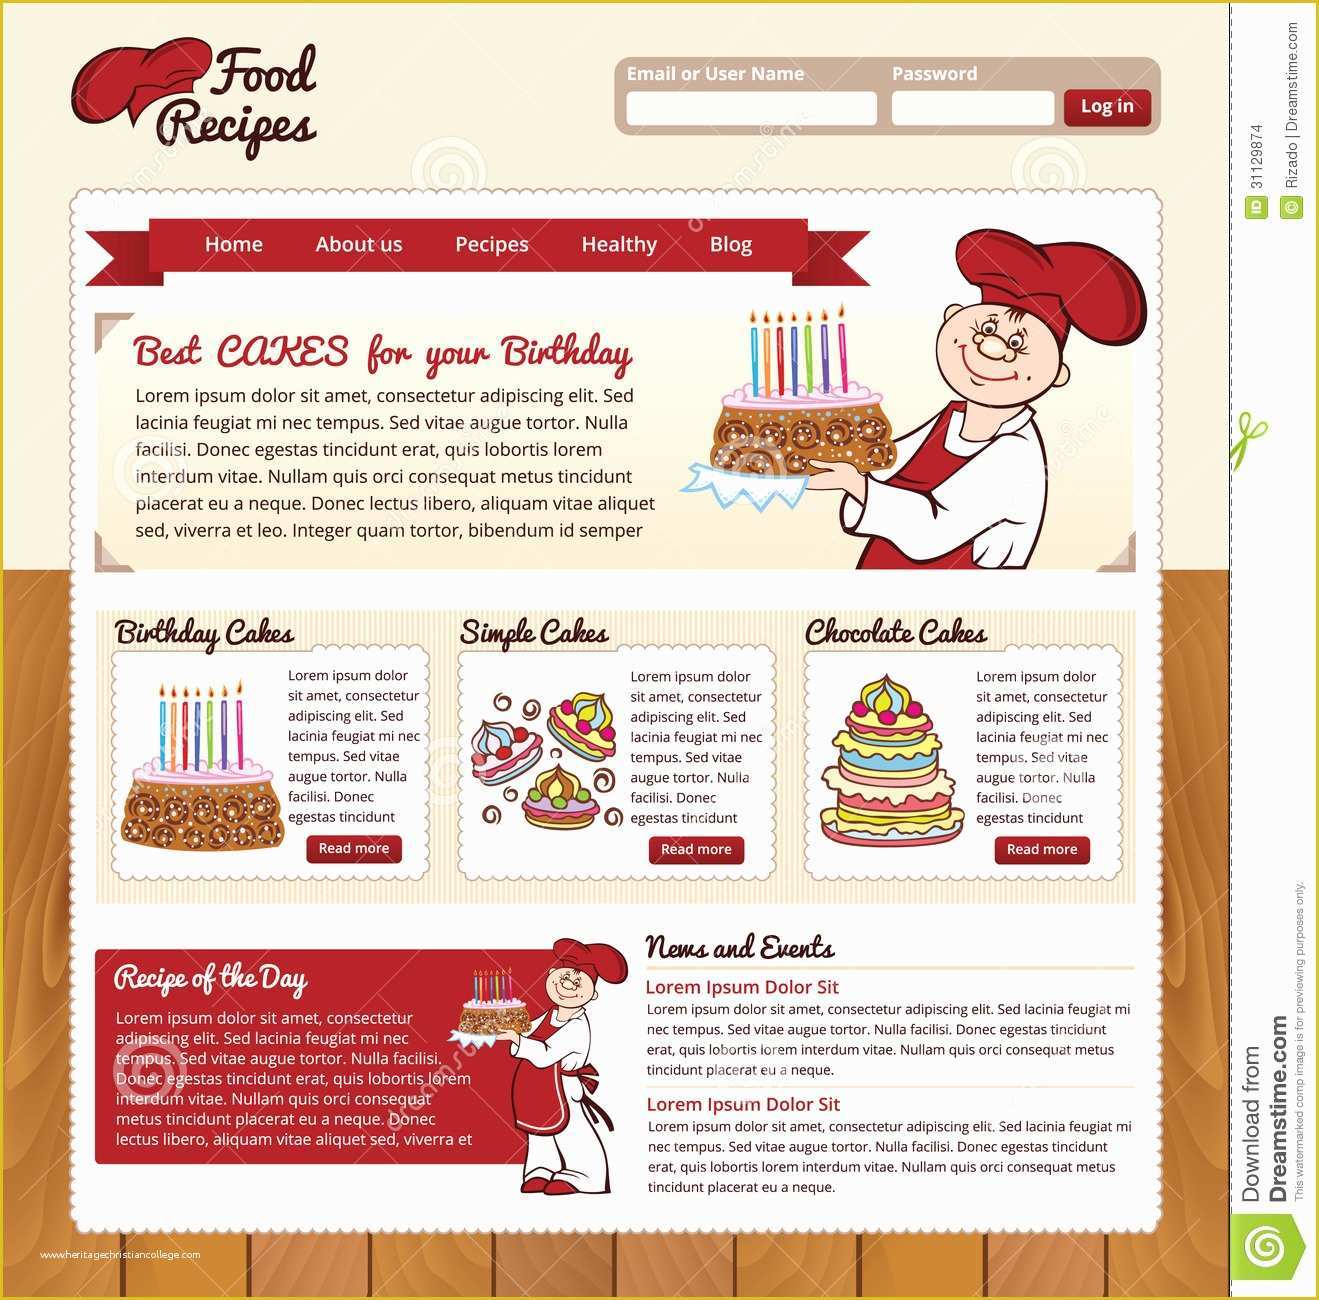 Free Recipe Website Template Of Food Recipes Web Template Stock Vector Illustration Of